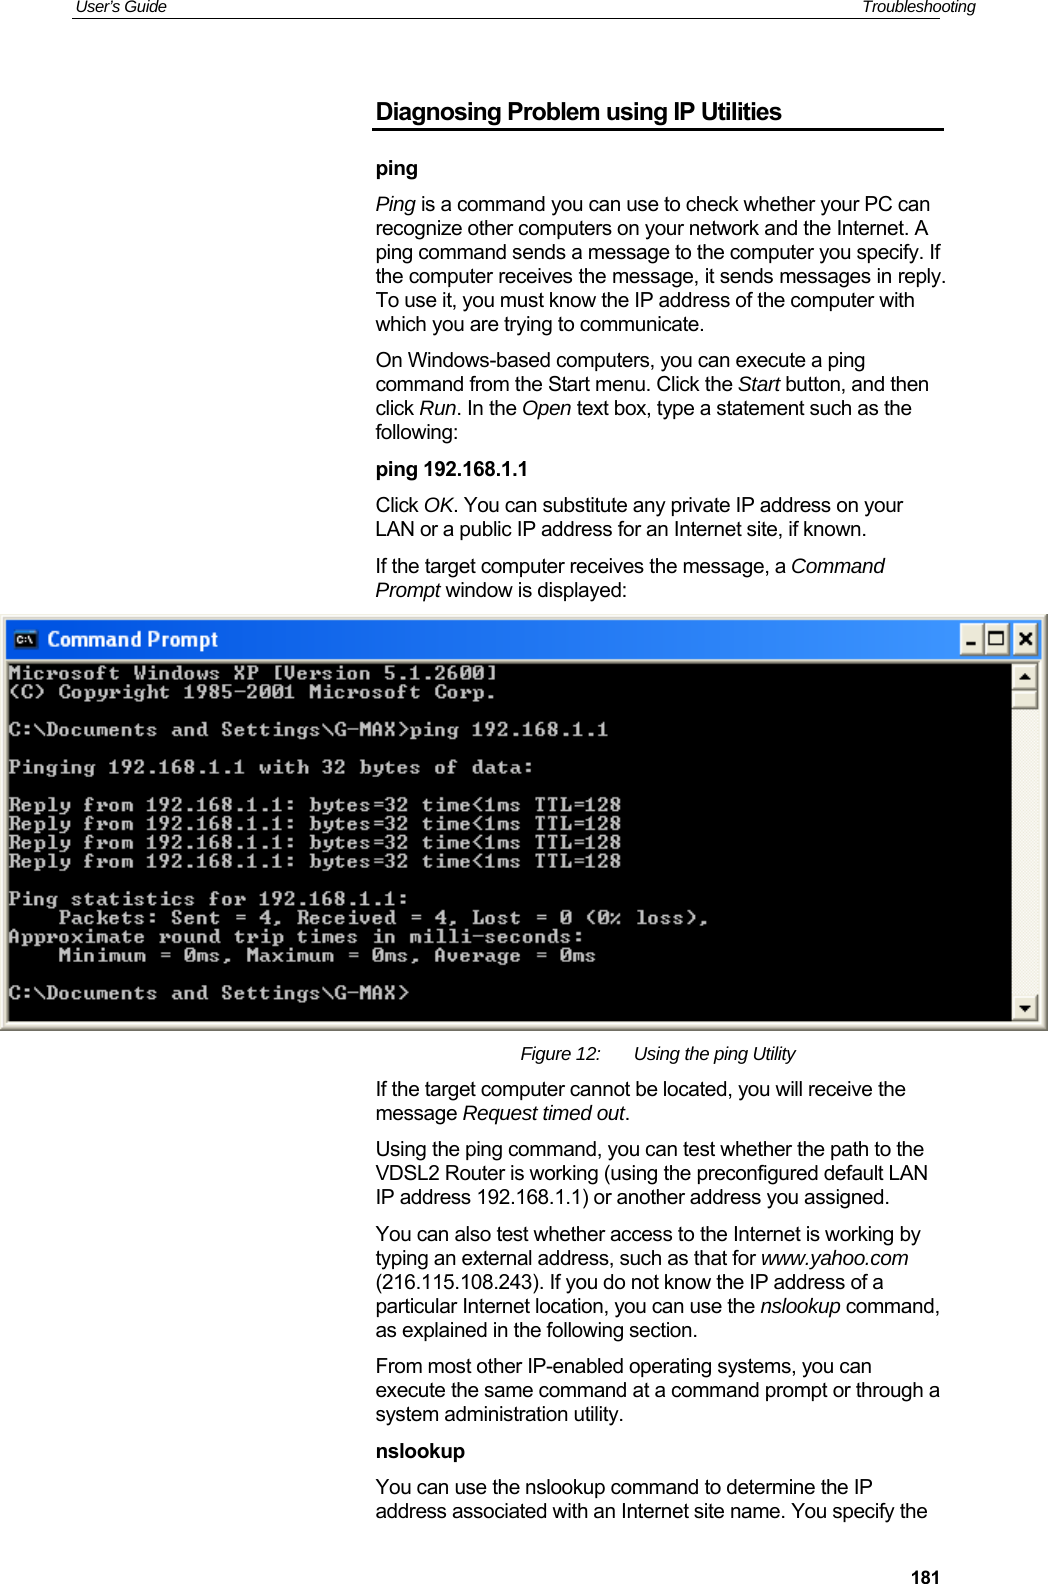 User’s Guide   Troubleshooting  181Diagnosing Problem using IP Utilities ping Ping is a command you can use to check whether your PC can recognize other computers on your network and the Internet. A ping command sends a message to the computer you specify. If the computer receives the message, it sends messages in reply. To use it, you must know the IP address of the computer with which you are trying to communicate.  On Windows-based computers, you can execute a ping command from the Start menu. Click the Start button, and then click Run. In the Open text box, type a statement such as the following: ping 192.168.1.1 Click OK. You can substitute any private IP address on your LAN or a public IP address for an Internet site, if known.  If the target computer receives the message, a Command Prompt window is displayed:  Figure 12:  Using the ping Utility If the target computer cannot be located, you will receive the message Request timed out. Using the ping command, you can test whether the path to the VDSL2 Router is working (using the preconfigured default LAN IP address 192.168.1.1) or another address you assigned. You can also test whether access to the Internet is working by typing an external address, such as that for www.yahoo.com (216.115.108.243). If you do not know the IP address of a particular Internet location, you can use the nslookup command, as explained in the following section. From most other IP-enabled operating systems, you can execute the same command at a command prompt or through a system administration utility. nslookup You can use the nslookup command to determine the IP address associated with an Internet site name. You specify the 